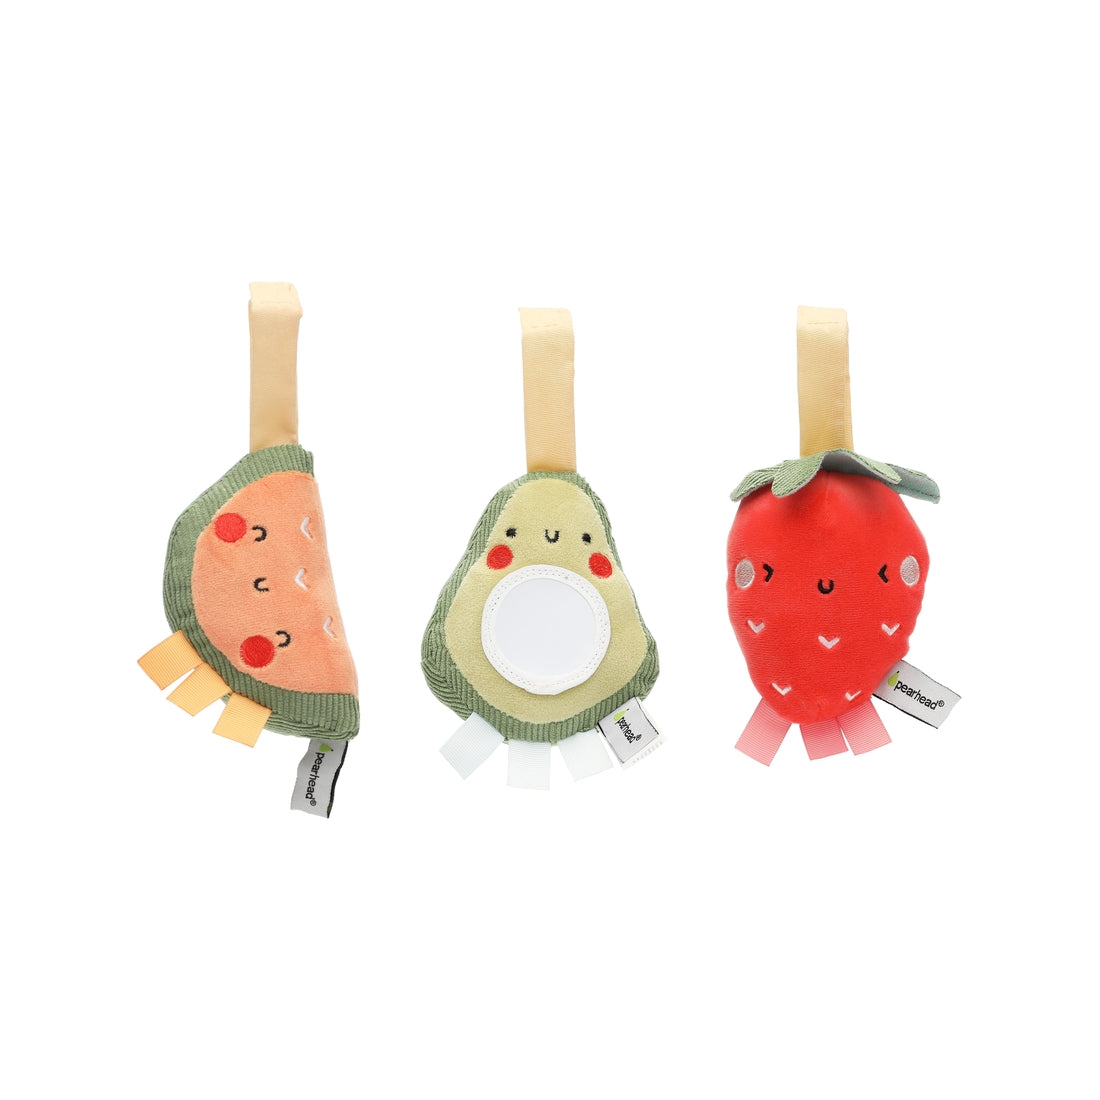 Pearhead fruit stroller toy set of 3 against white backdrop